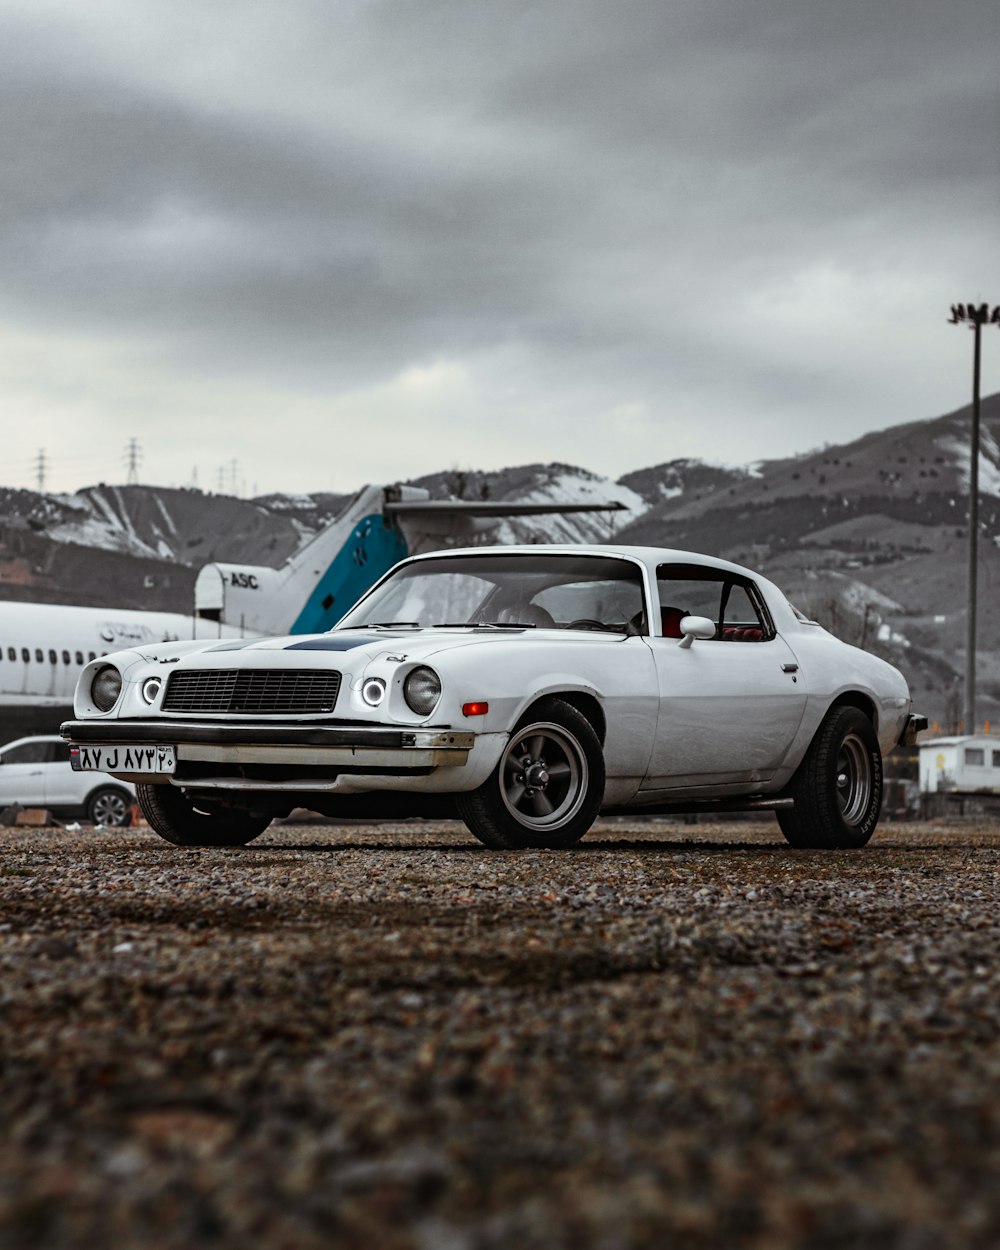 a white car parked in front of an airplane